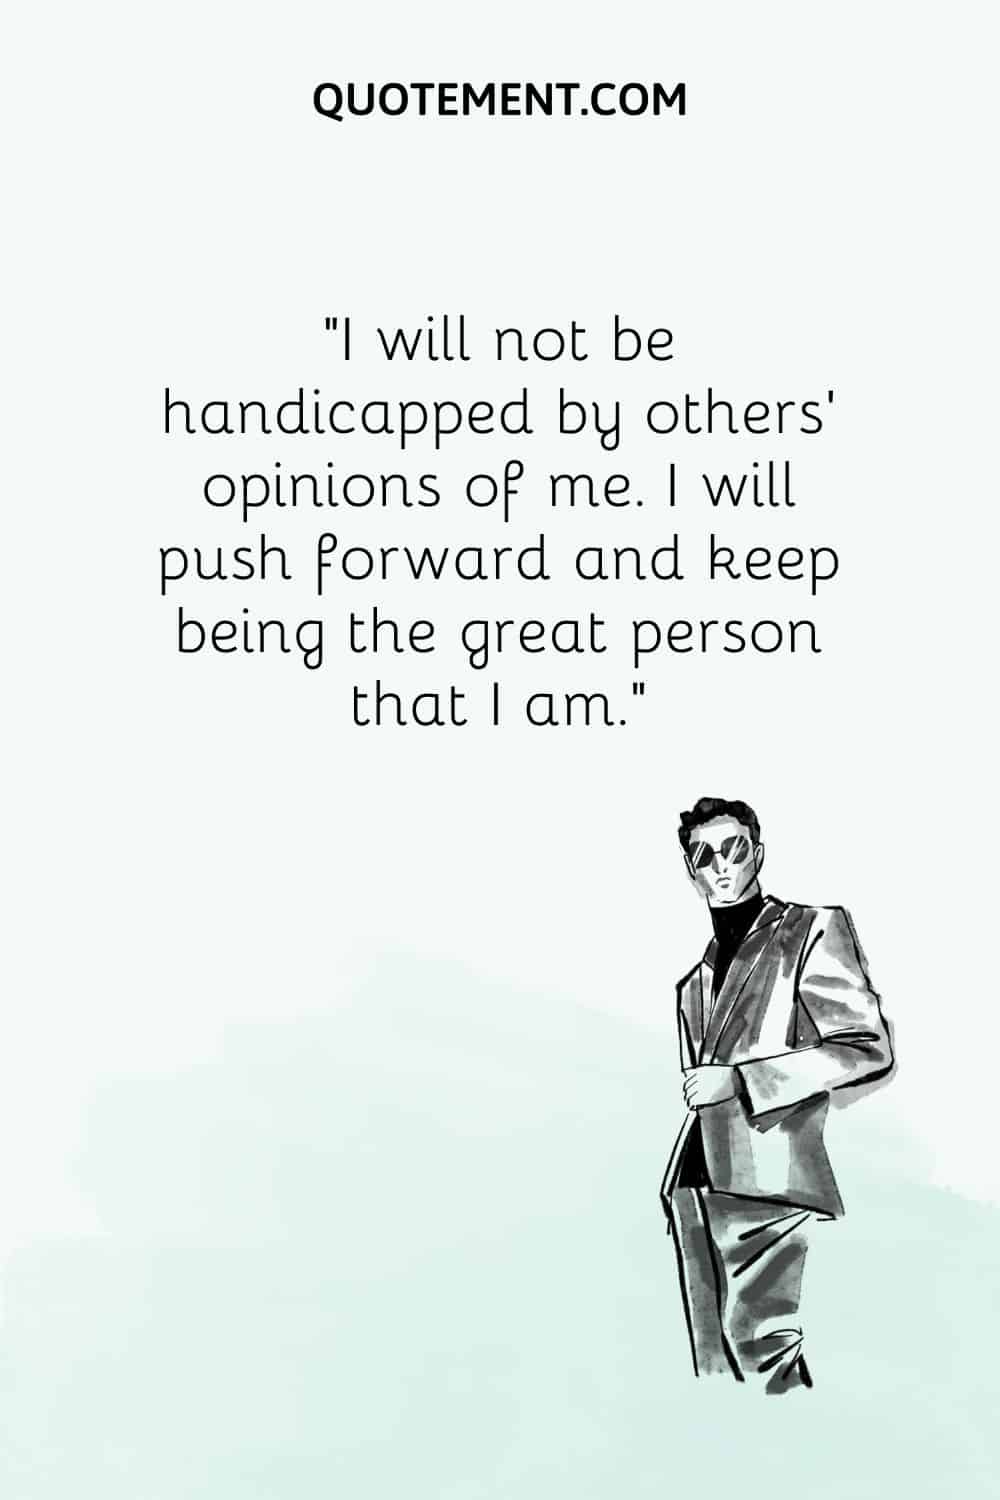 I will not be handicapped by others’ opinions of me